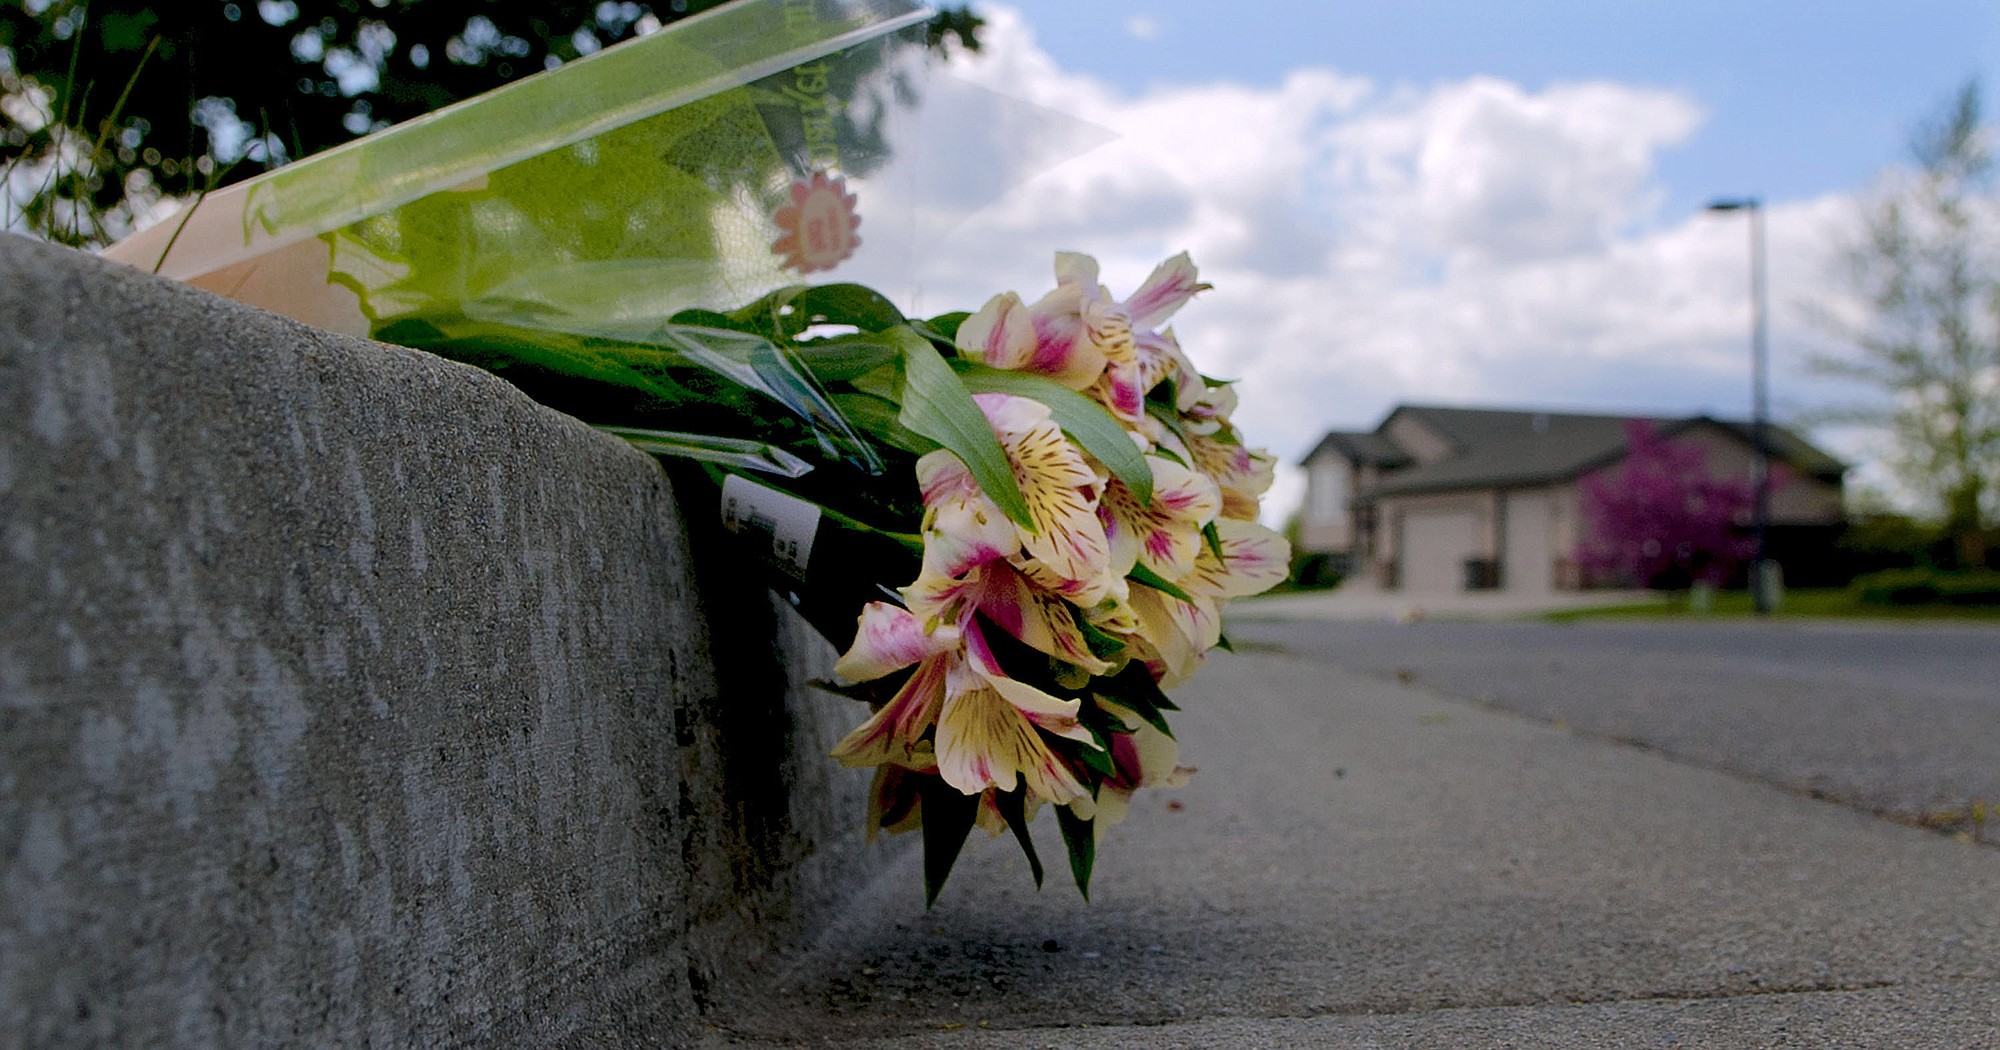 Photos by Kathy Plonka/The Spokesman-Review
Flowers lie on the ground Tuesday in Coeur d'Alene, Idaho, hours after police Sgt. Greg Moore was shot Tuesday morning after checking on a suspicious individual. He later died of his injuries.